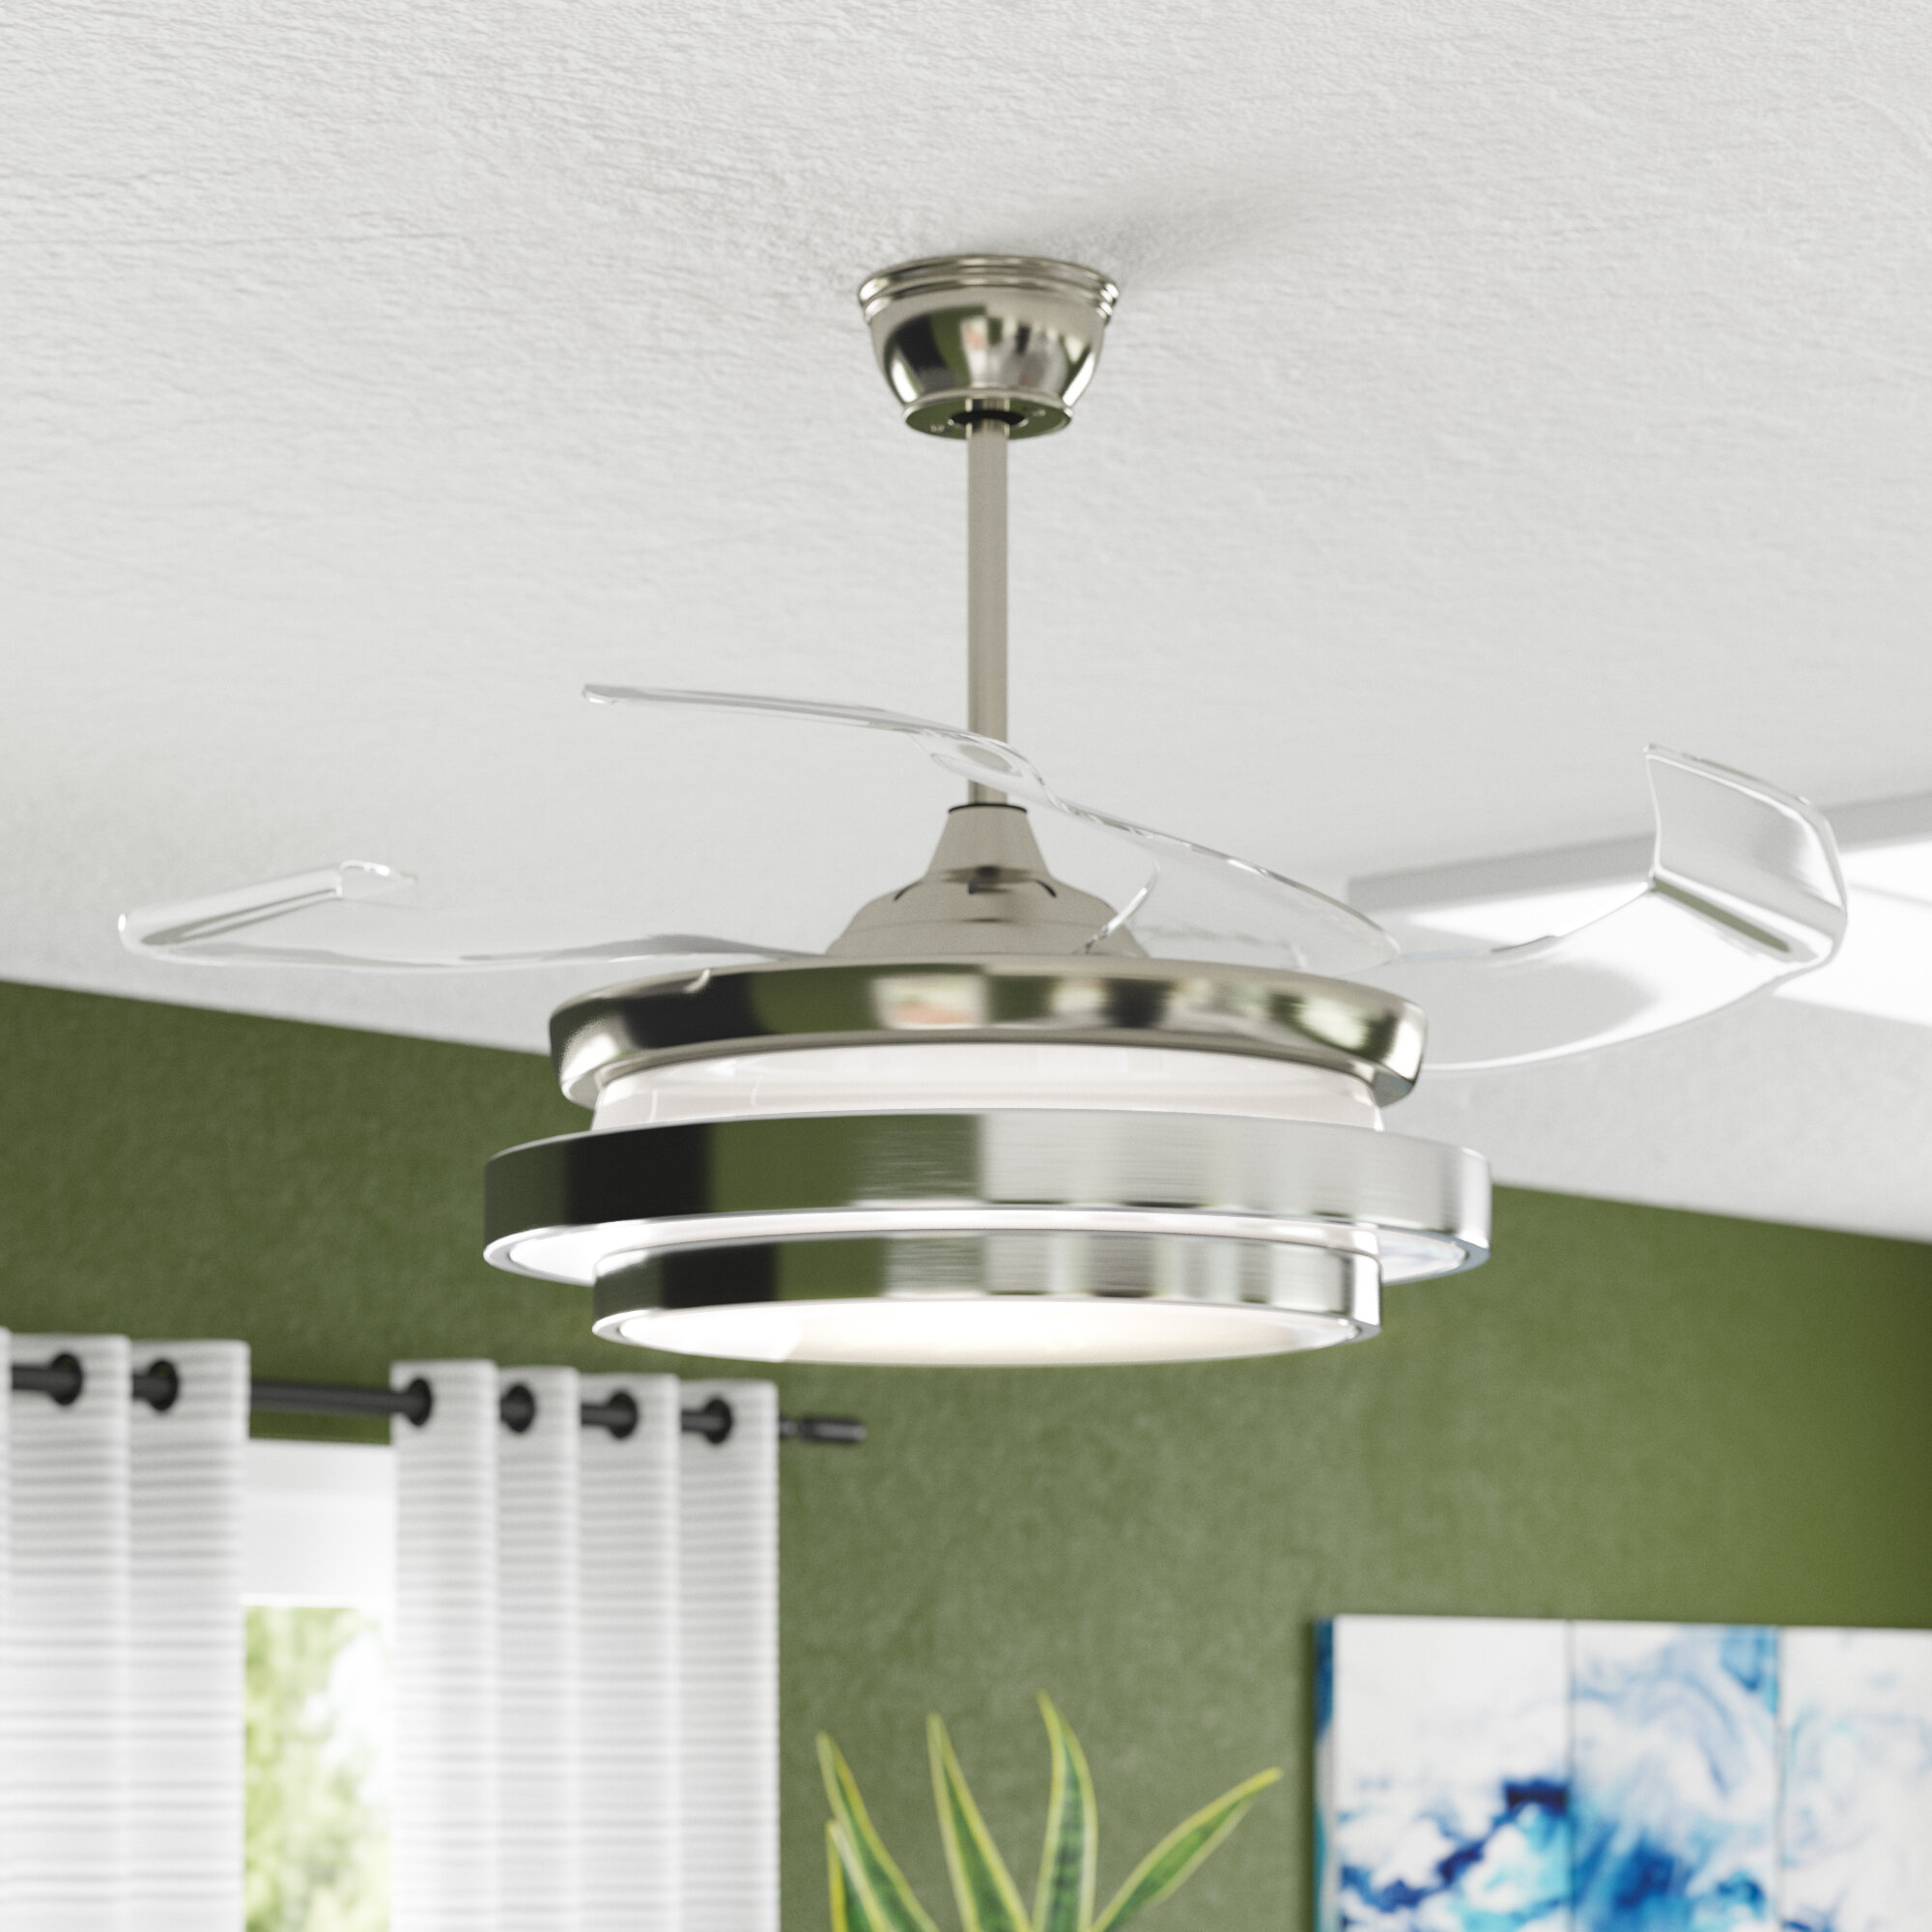 Modern Ceiling Fan w/ LED Panel Light & Remote Control Silver Color Blades 